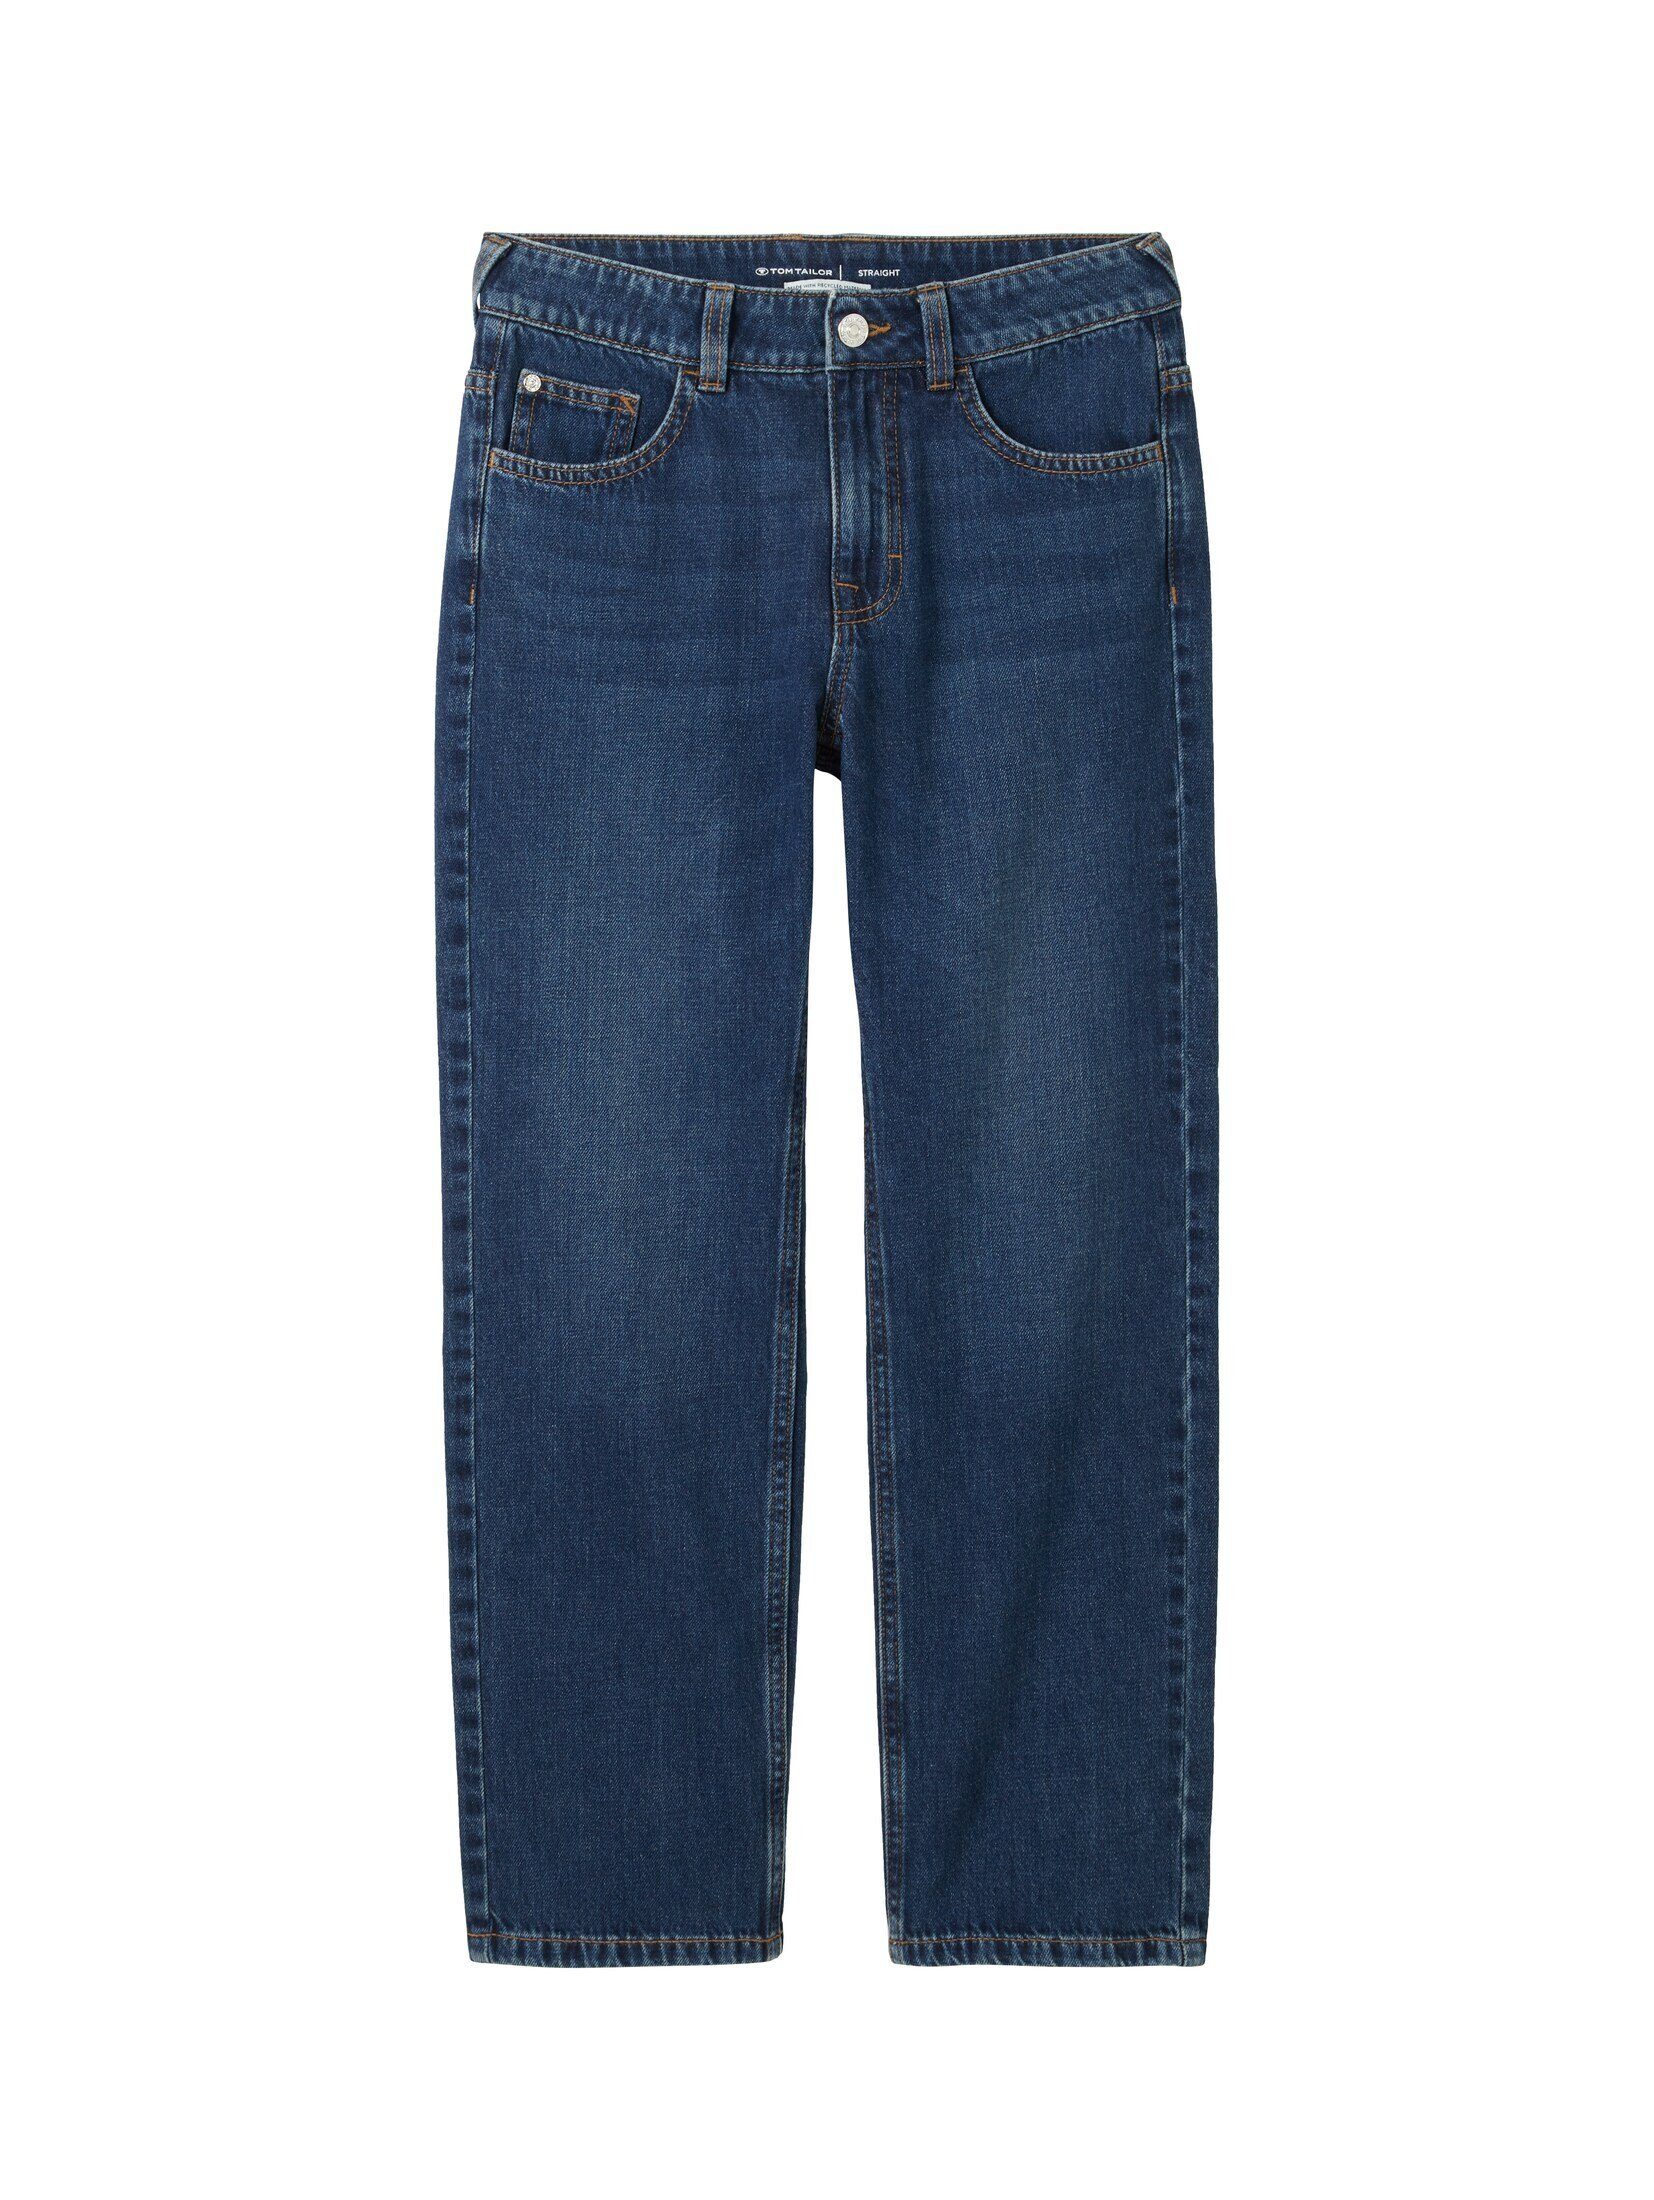 TOM TAILOR Gerade Jeans Straight Jeans mit recycelter Baumwolle